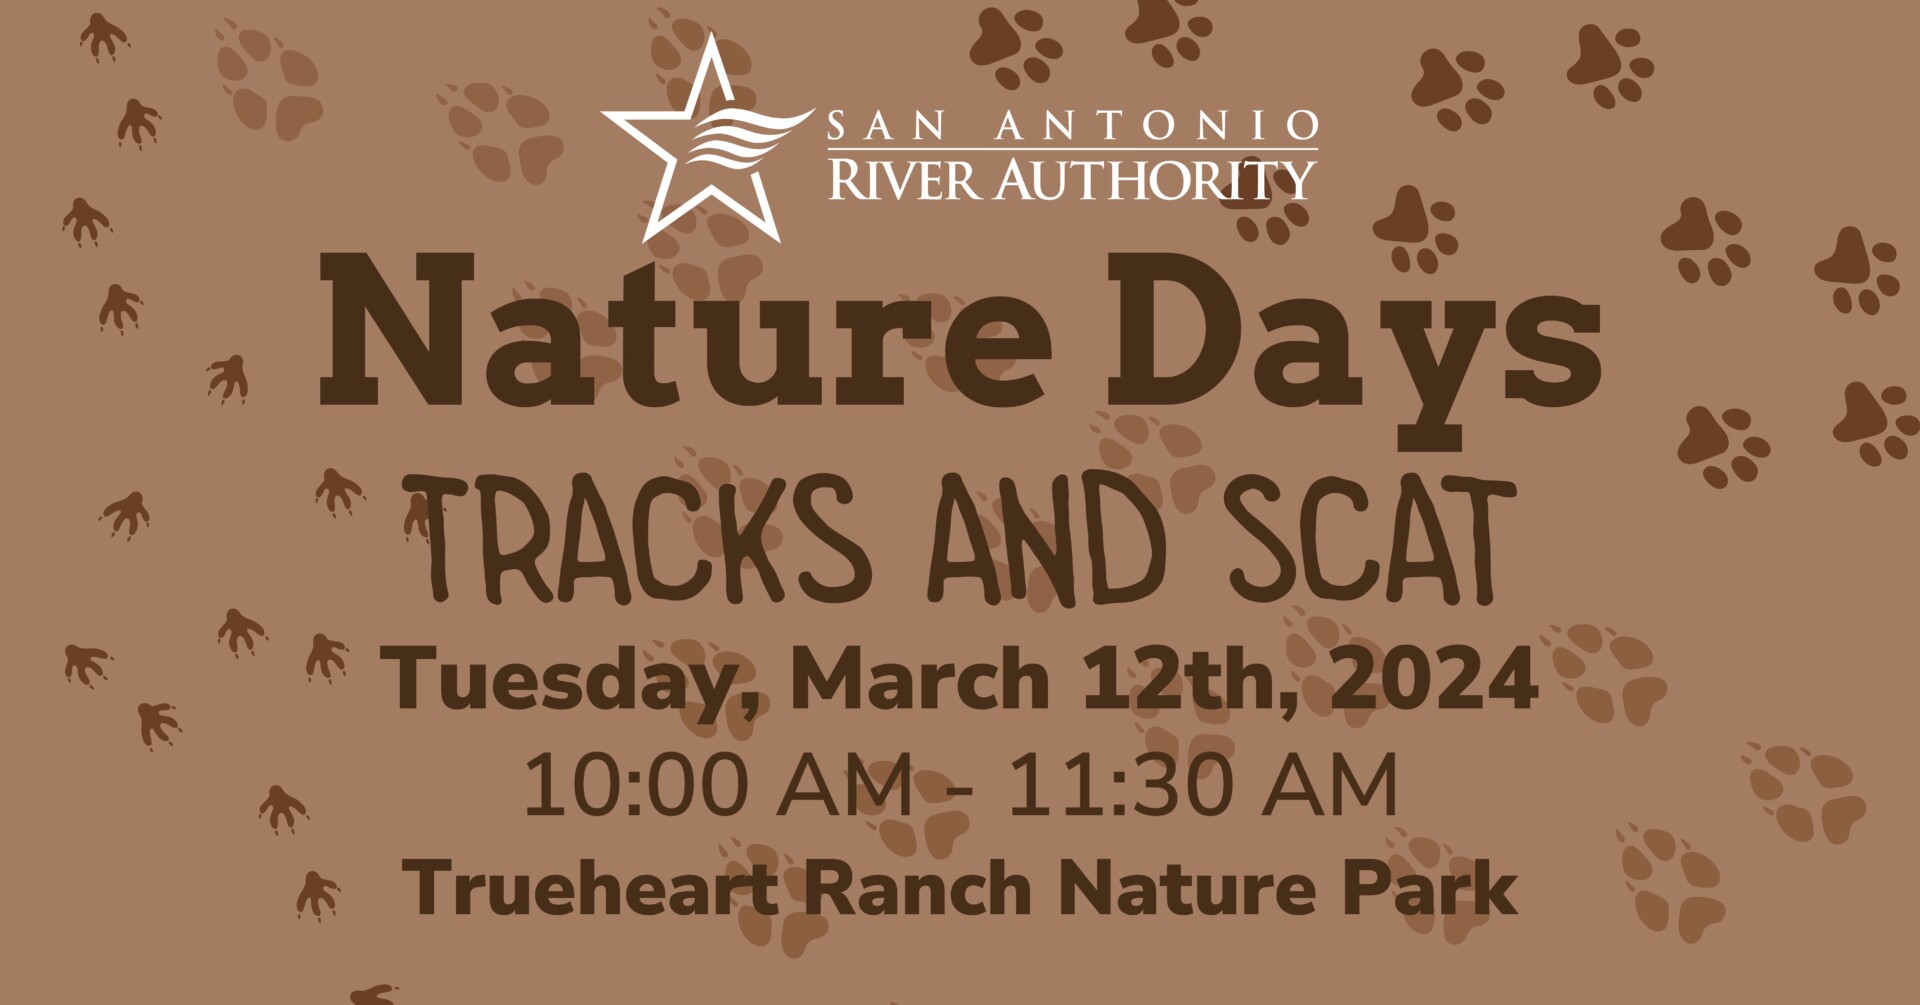 Nature Days - Tracks and Scat